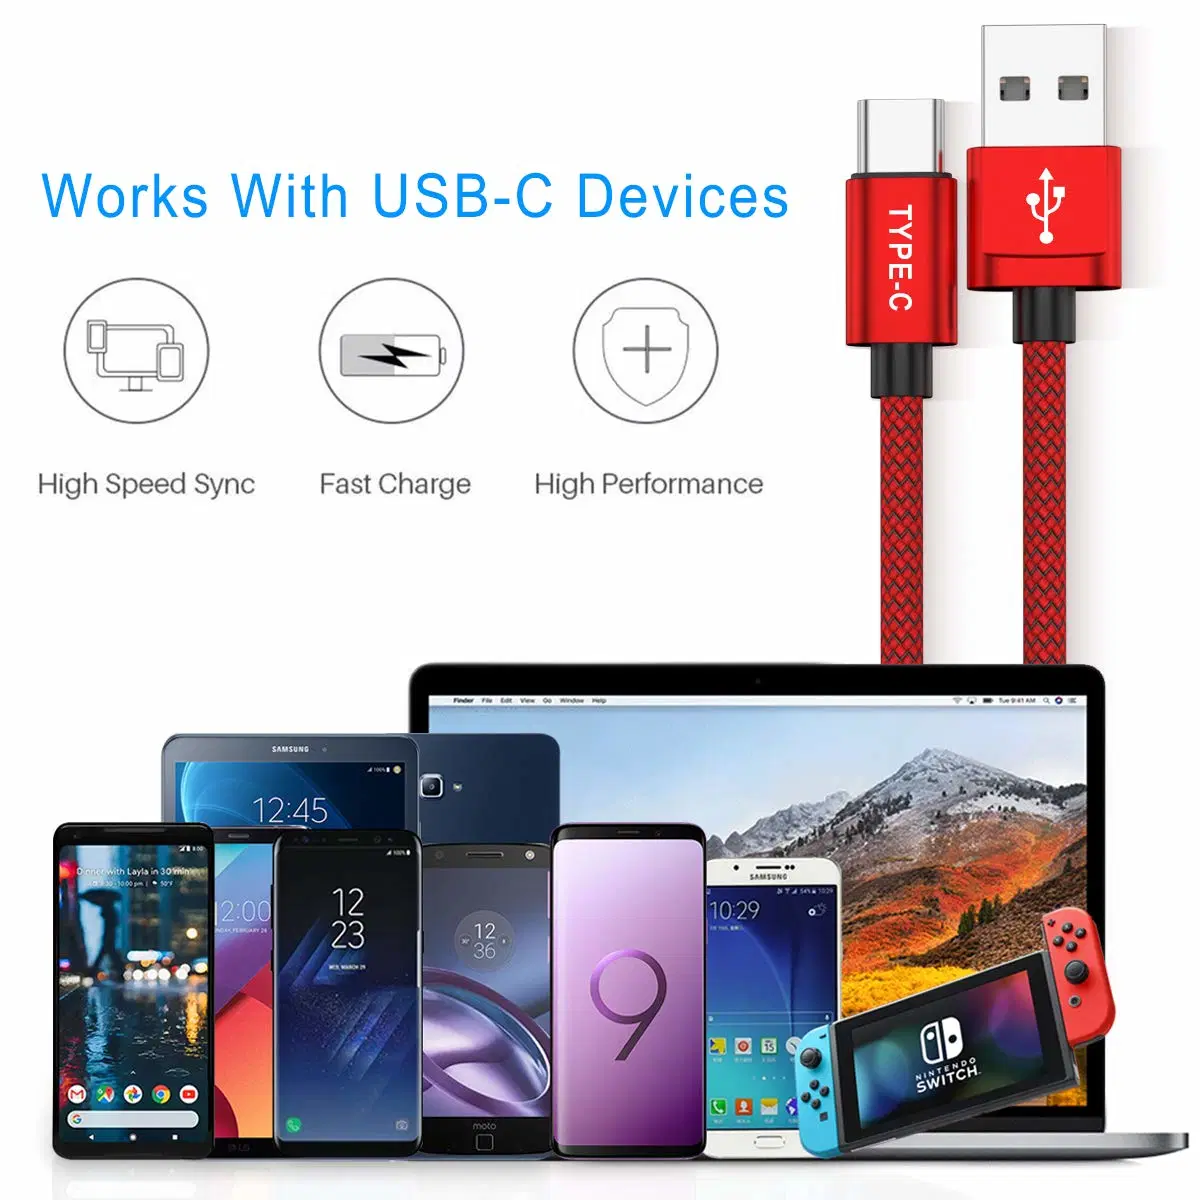 USB Type a 2.0 3.0 to USB Type C Cable for Mobile Phone